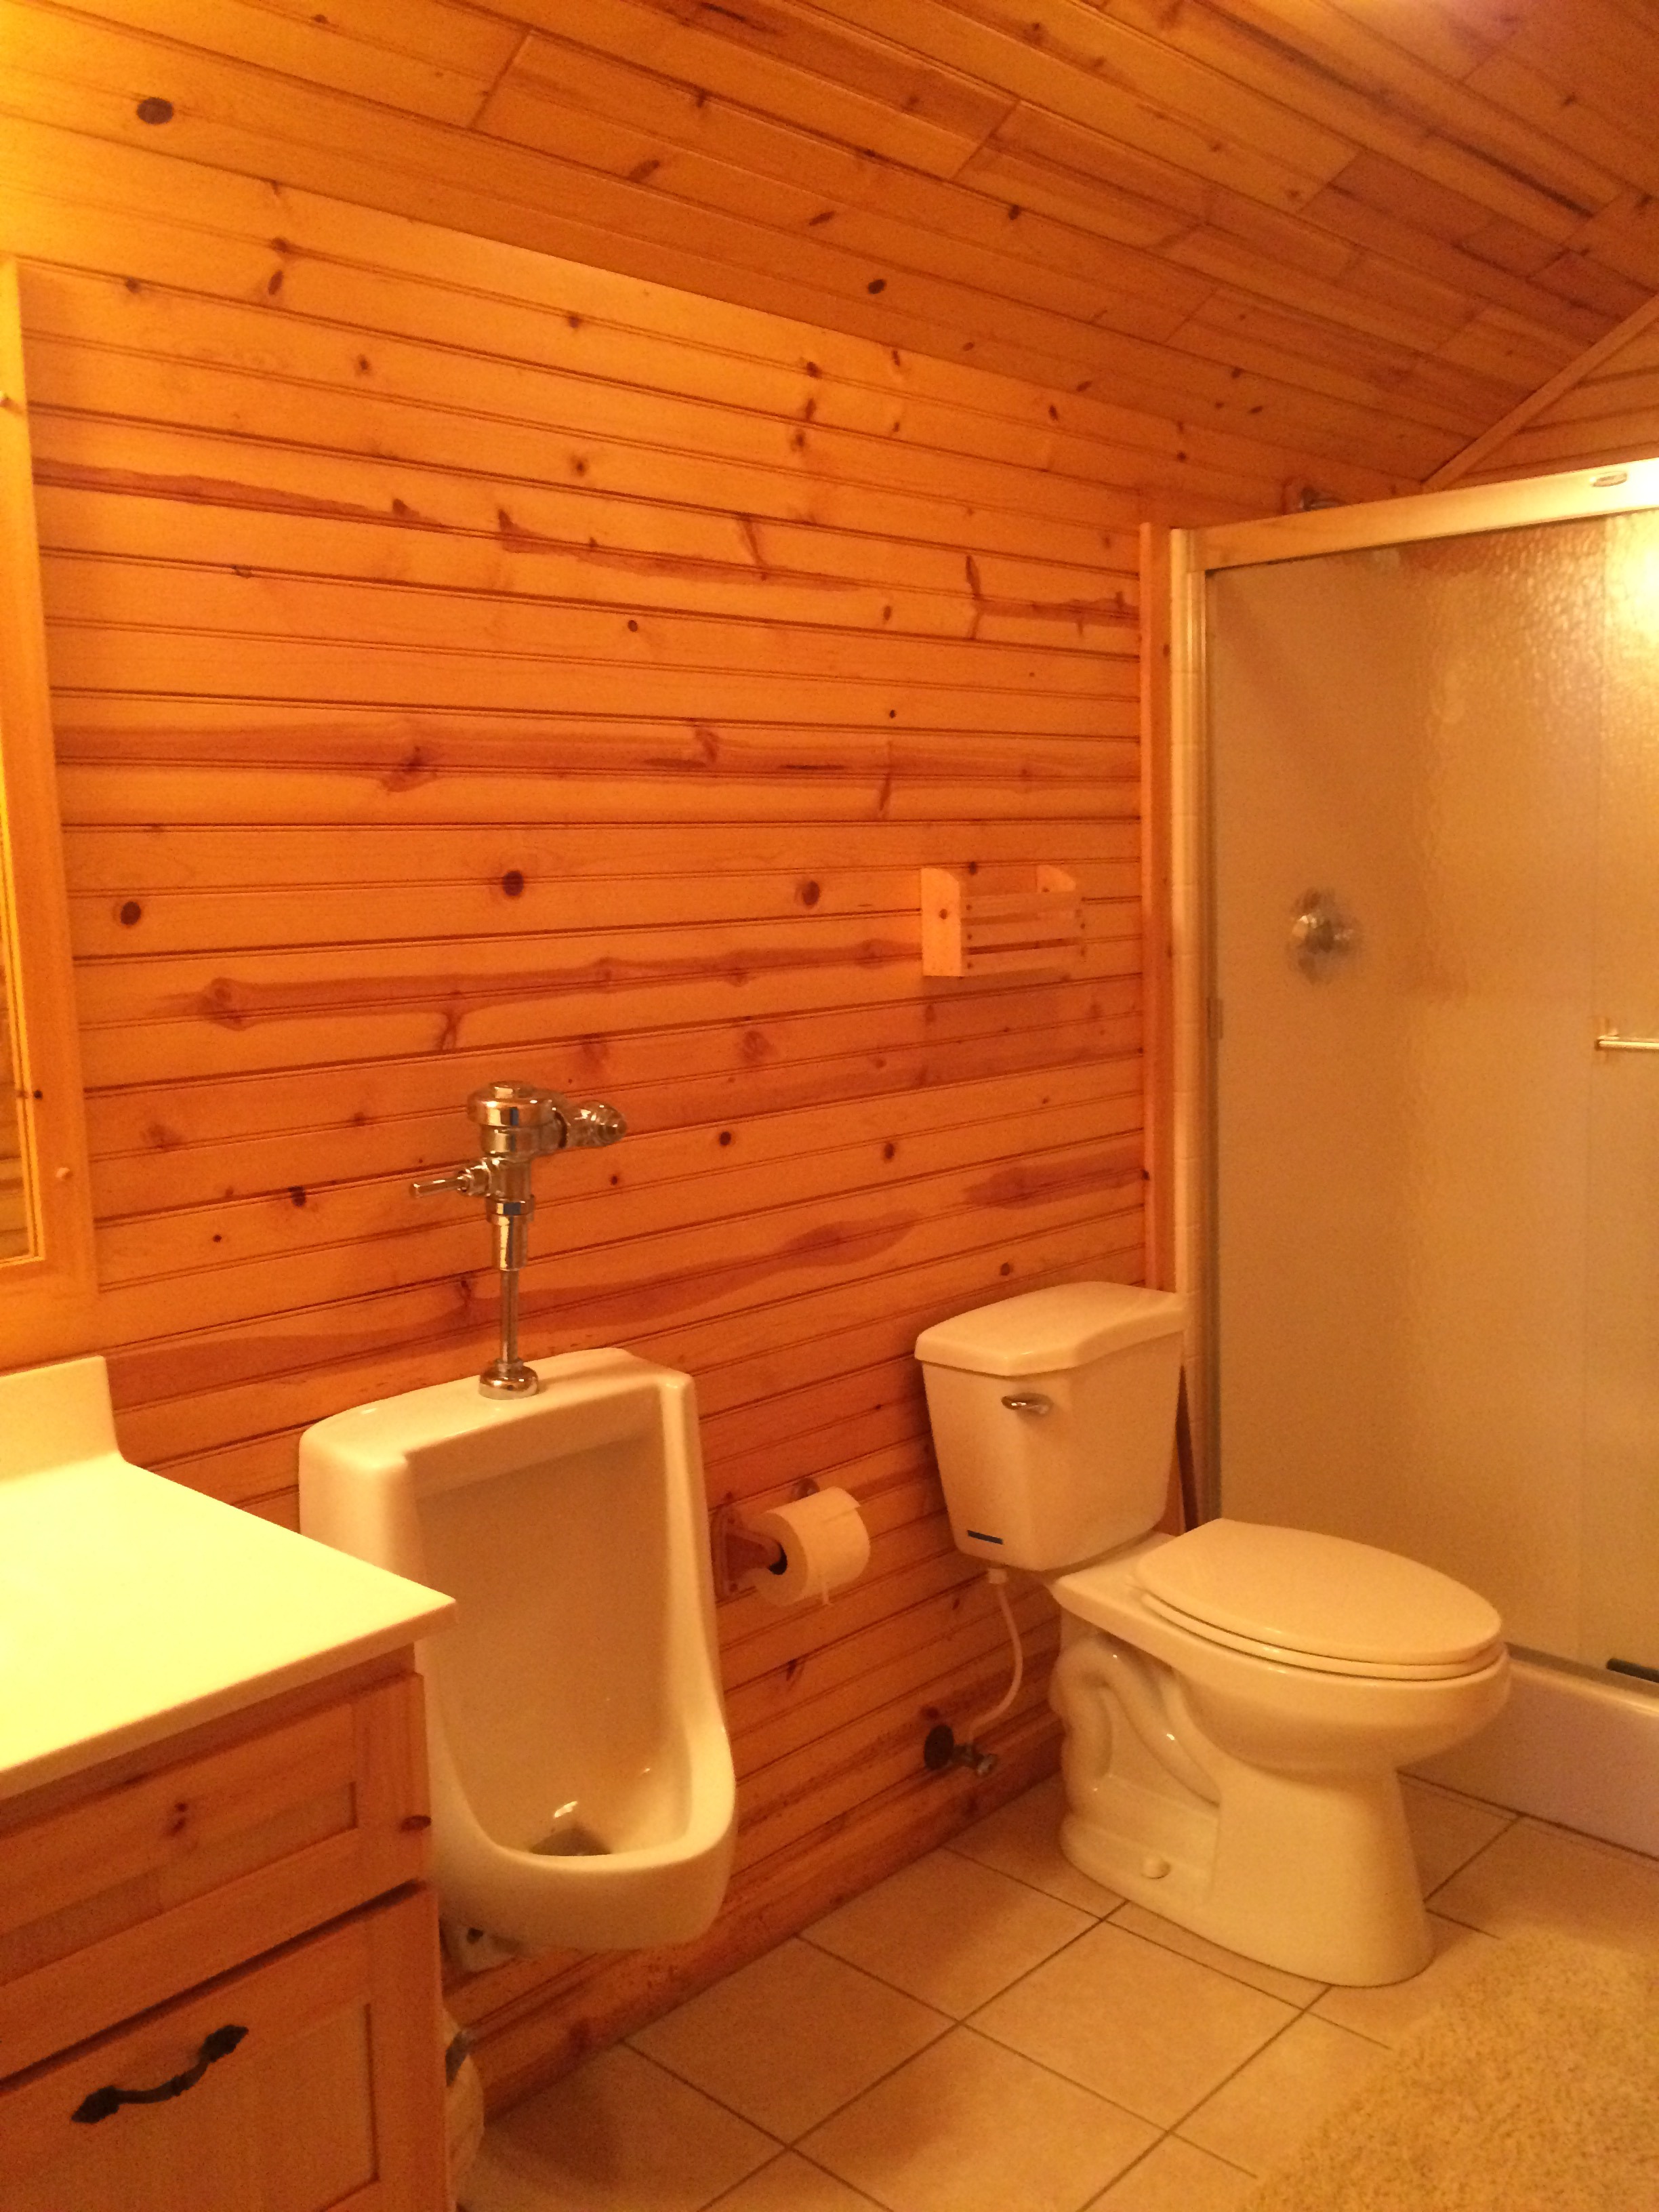 His bathroom on 2nd floor of Torch Lake Lodge.